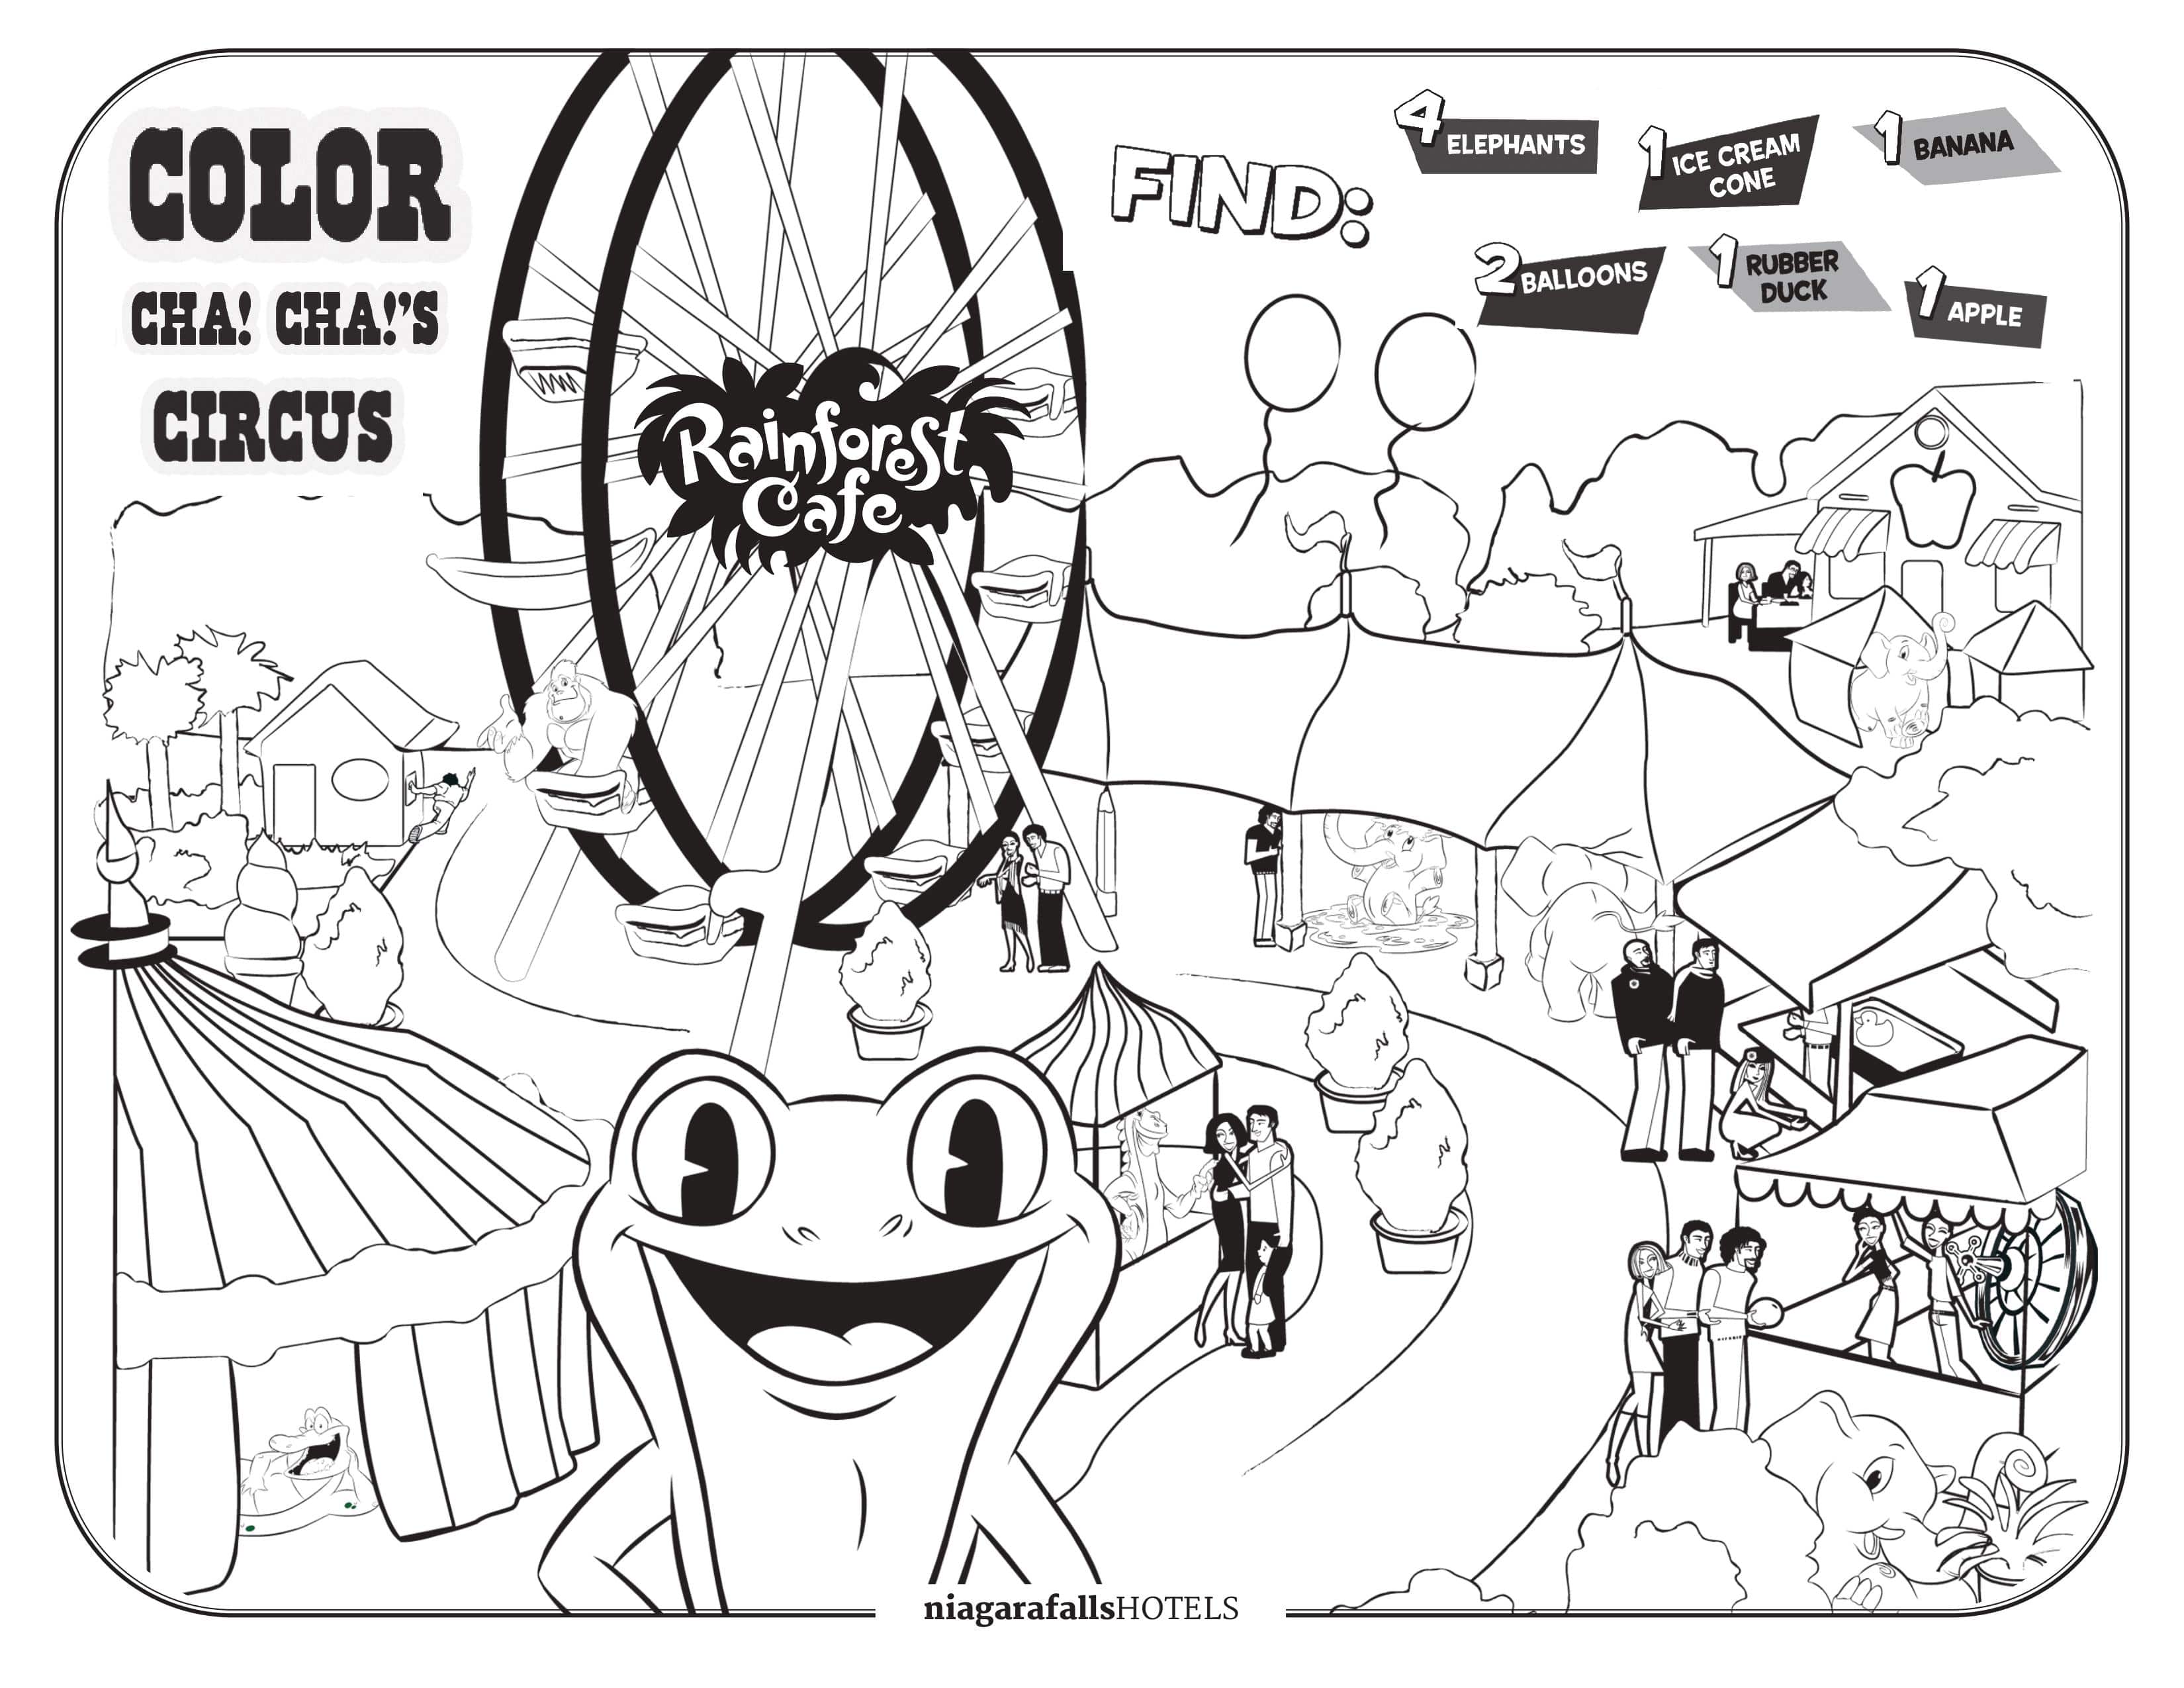 Rainforest Cafe Colouring Page 2